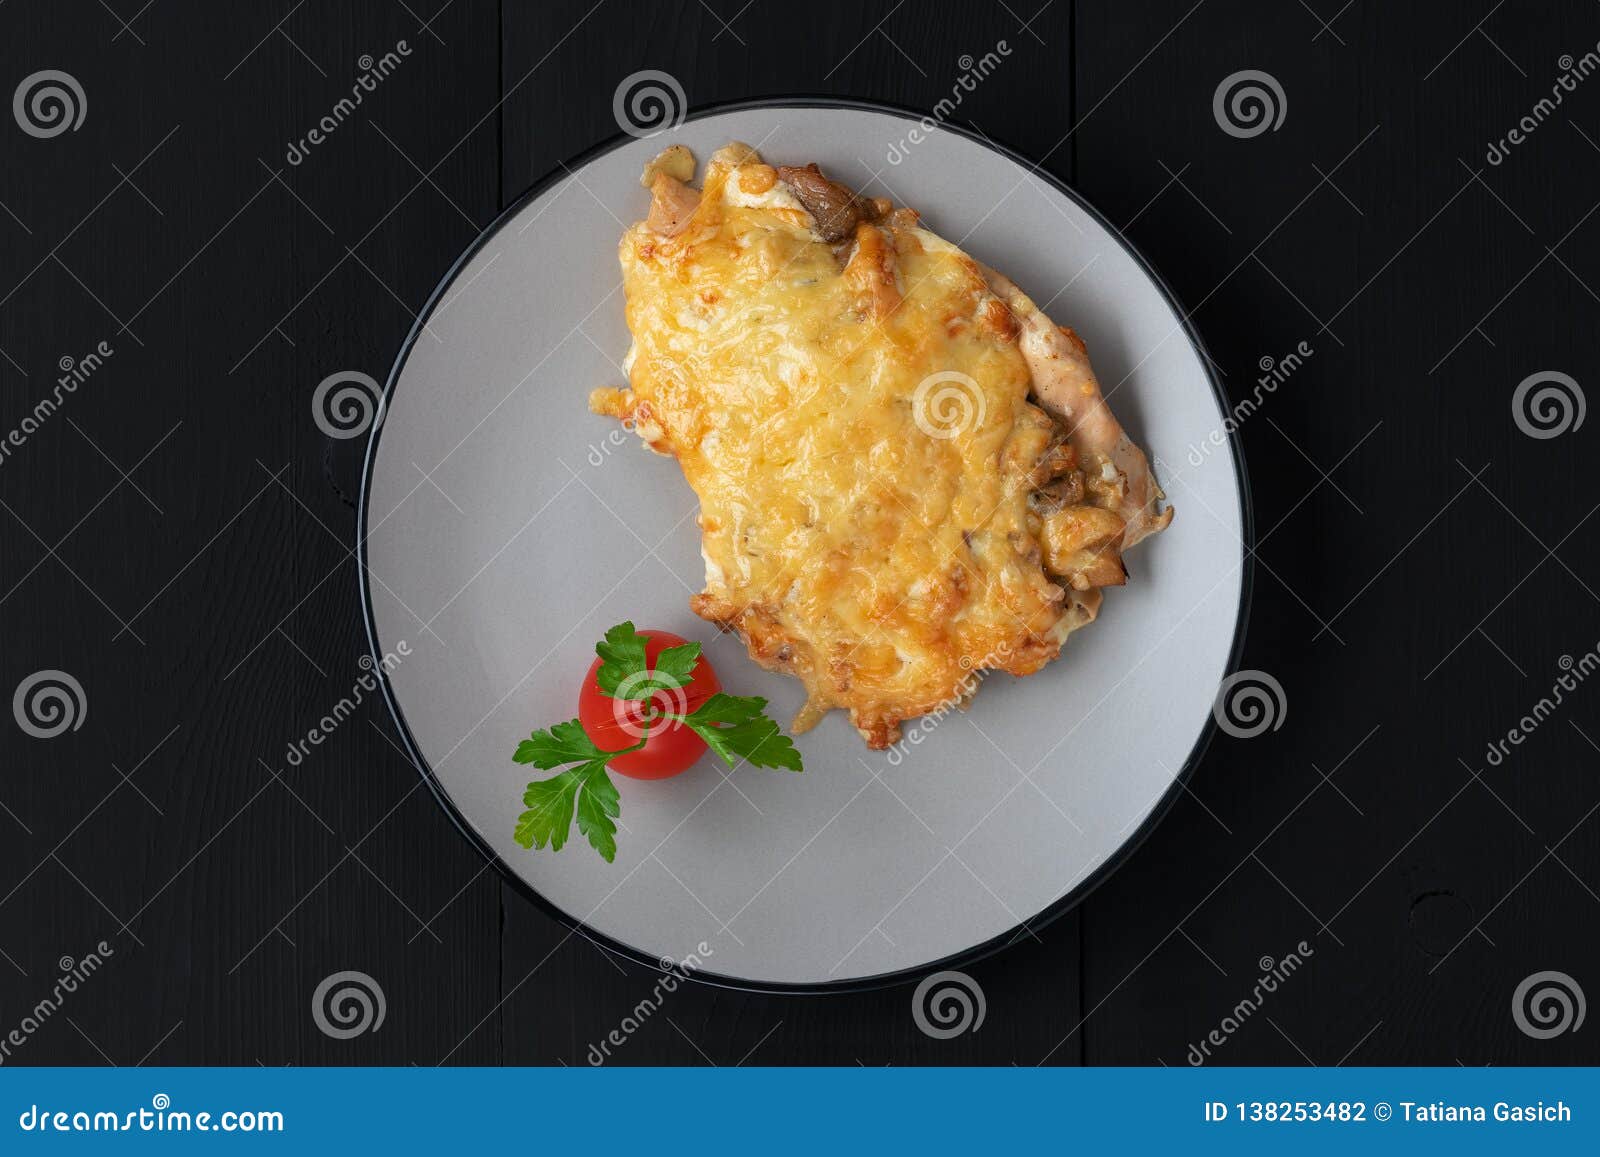 baked chicken under cheese with tomate and parsley